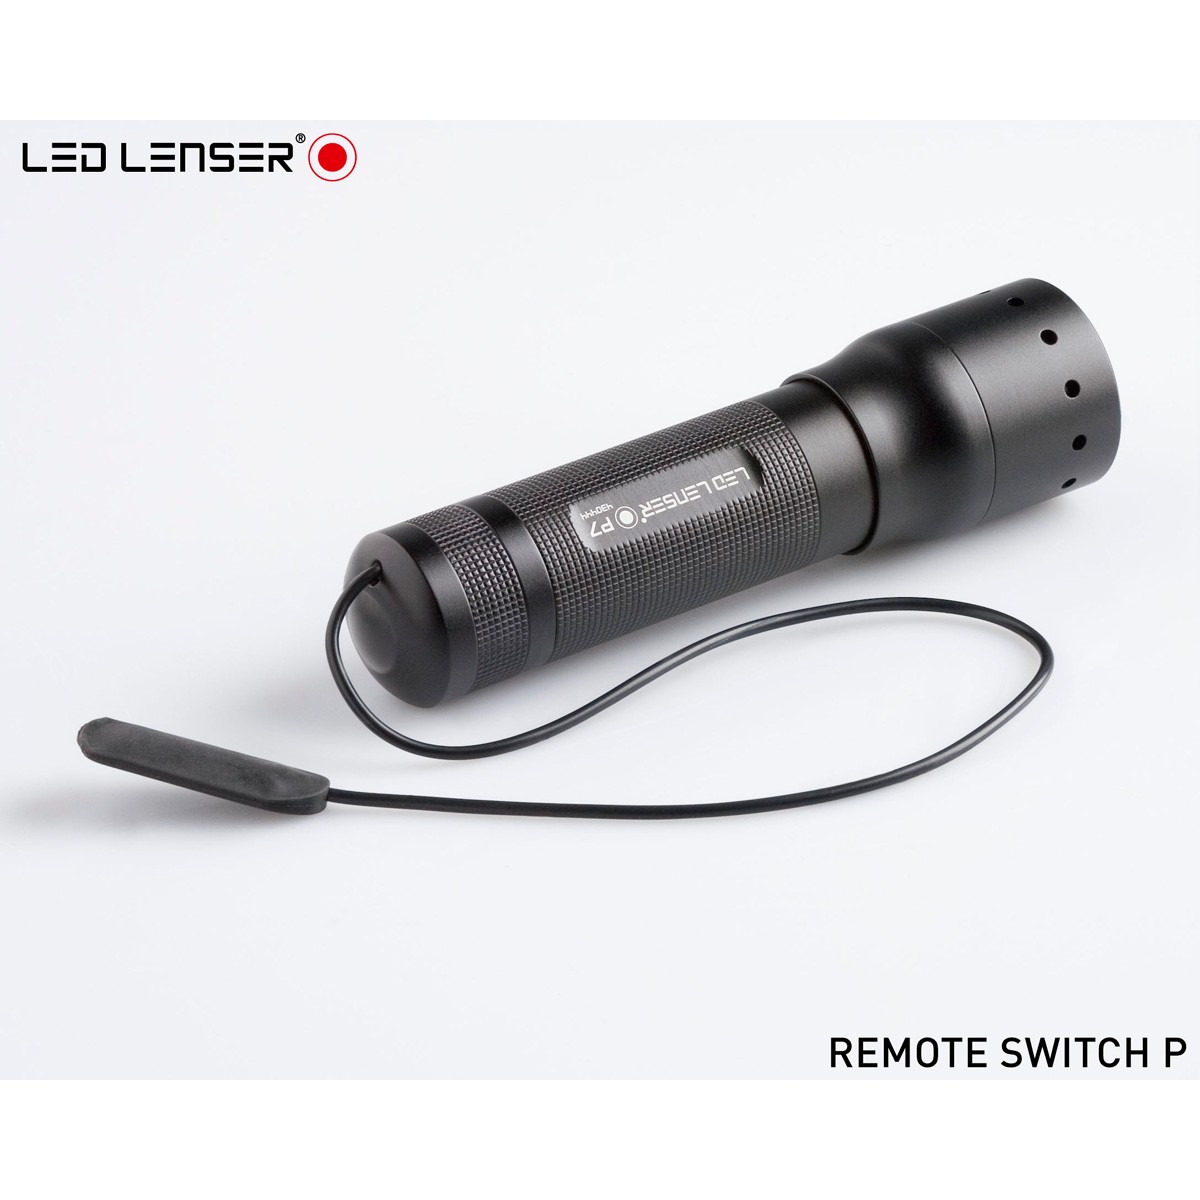 Len Lenser Tailcap with Remote Switch for P7